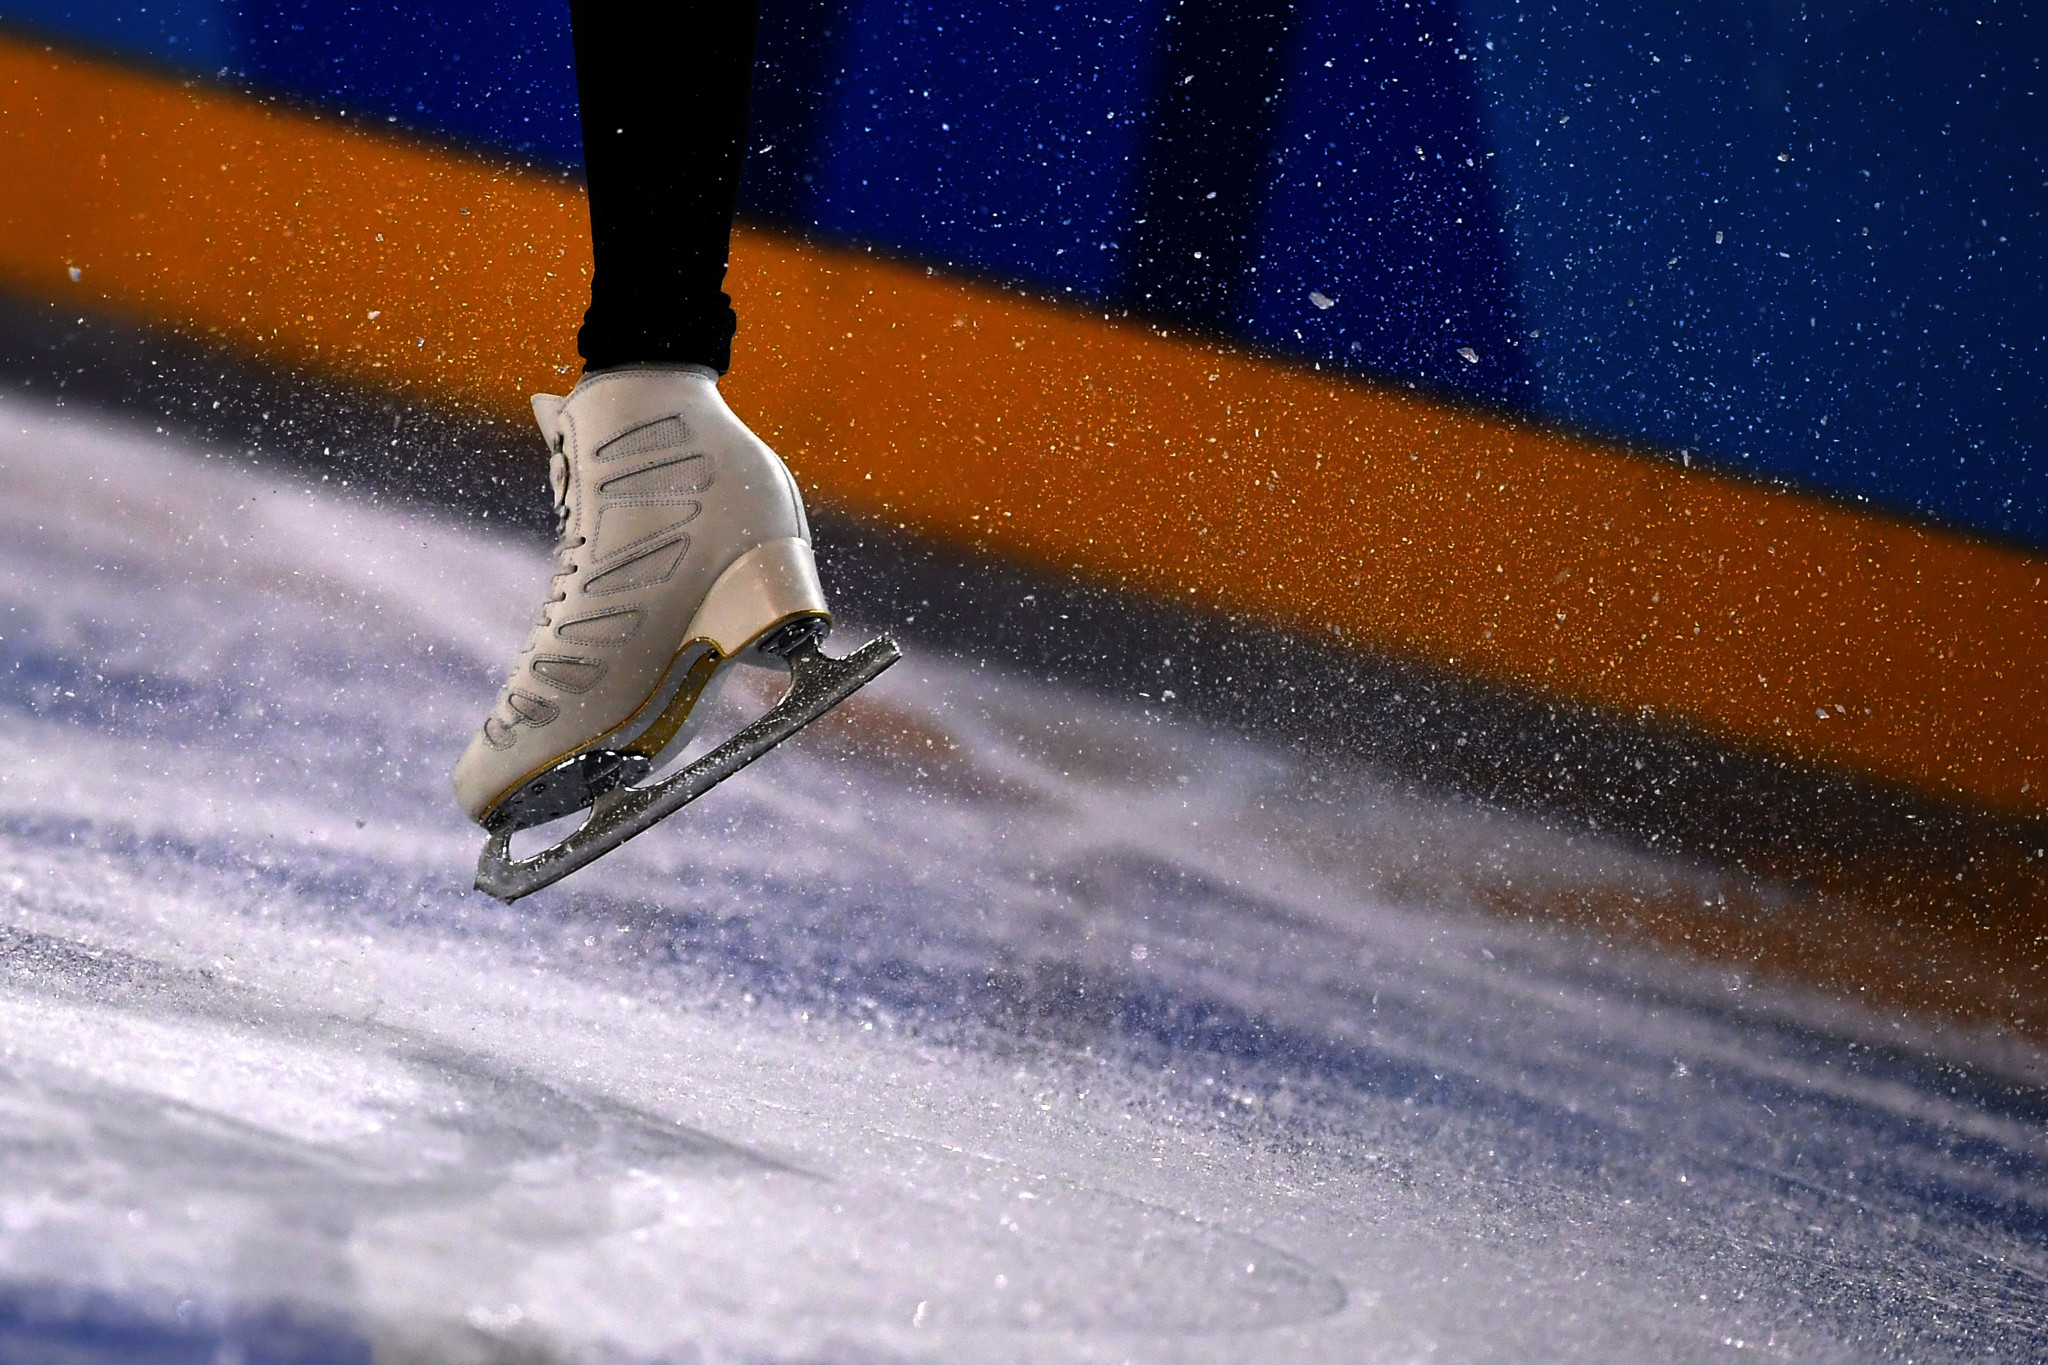 The first World Ice Skating Day is set to be celebrated on December 4 this year ©Getty Images